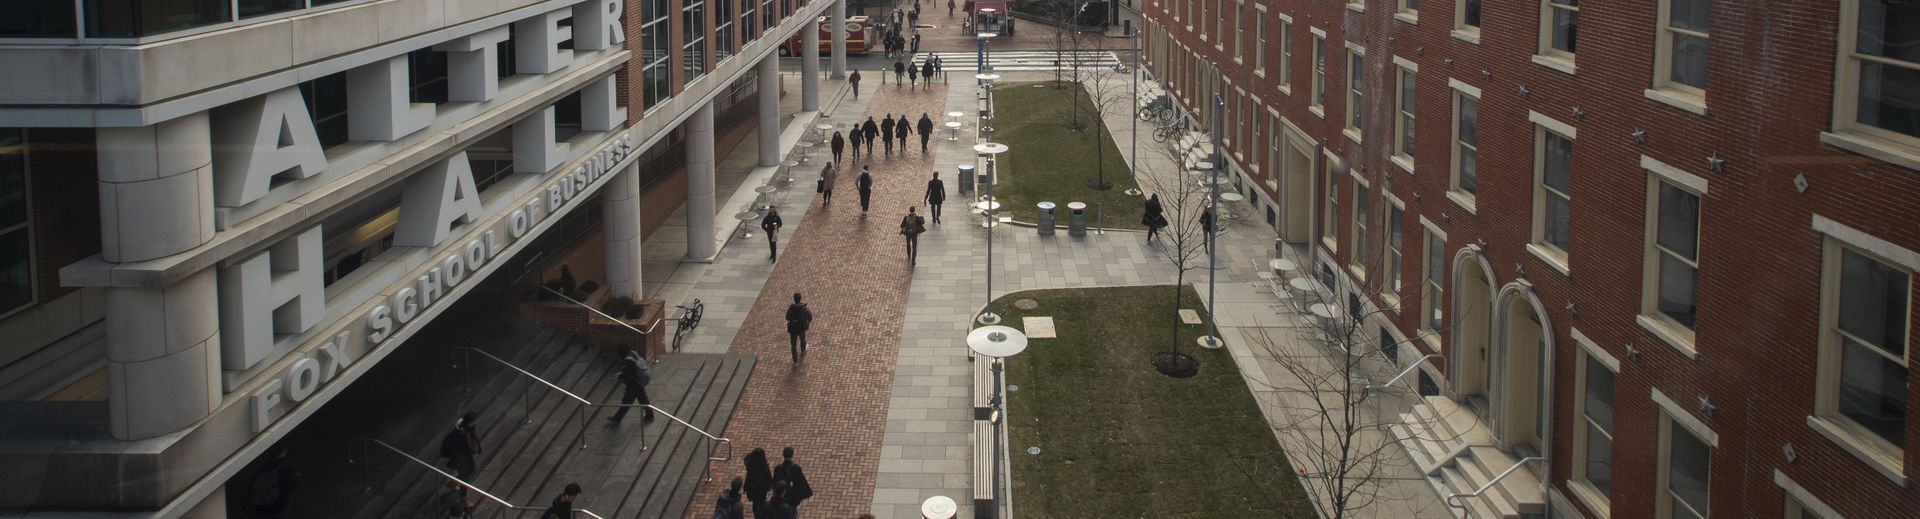 Temple University's Liacouras Walk and Alter Hall.